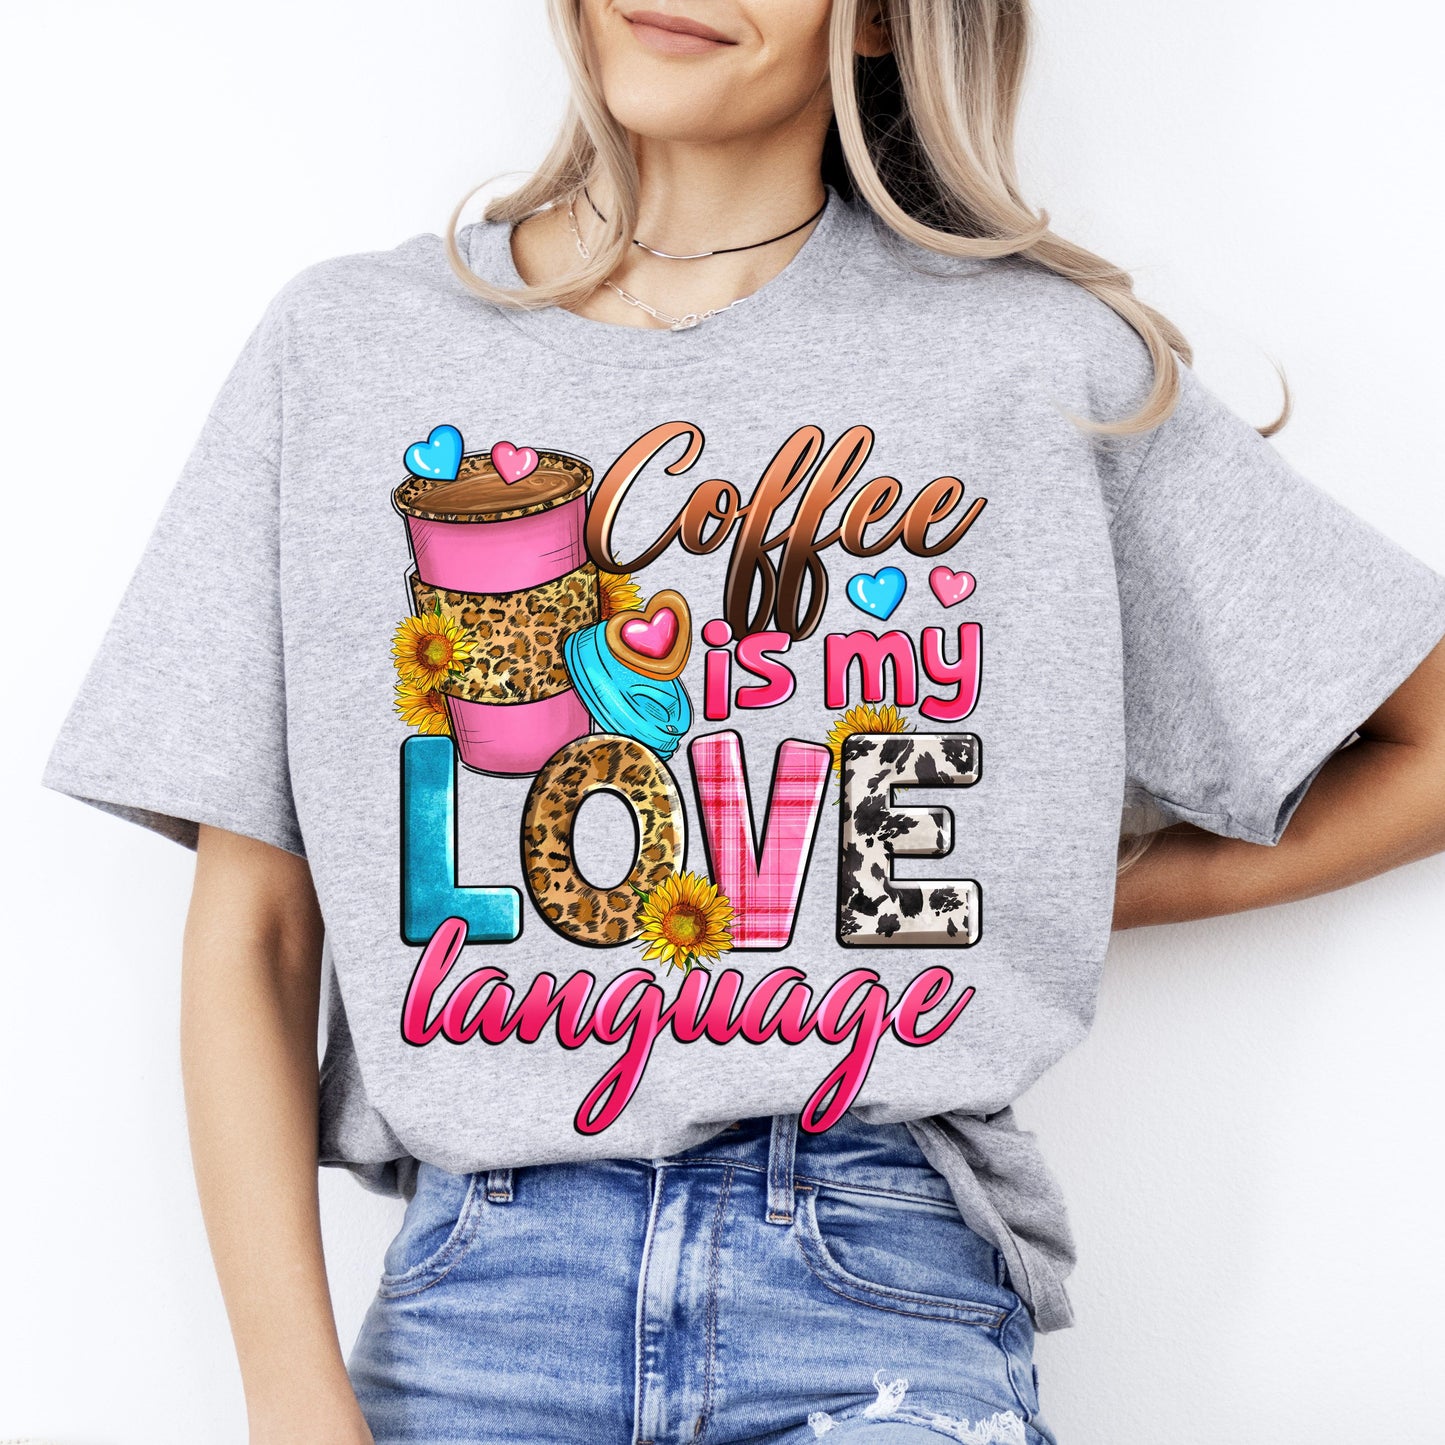 Coffee is my love language T-Shirt Barista coffee lover Unisex tee White Sand Sport Grey-Sport Grey-Family-Gift-Planet